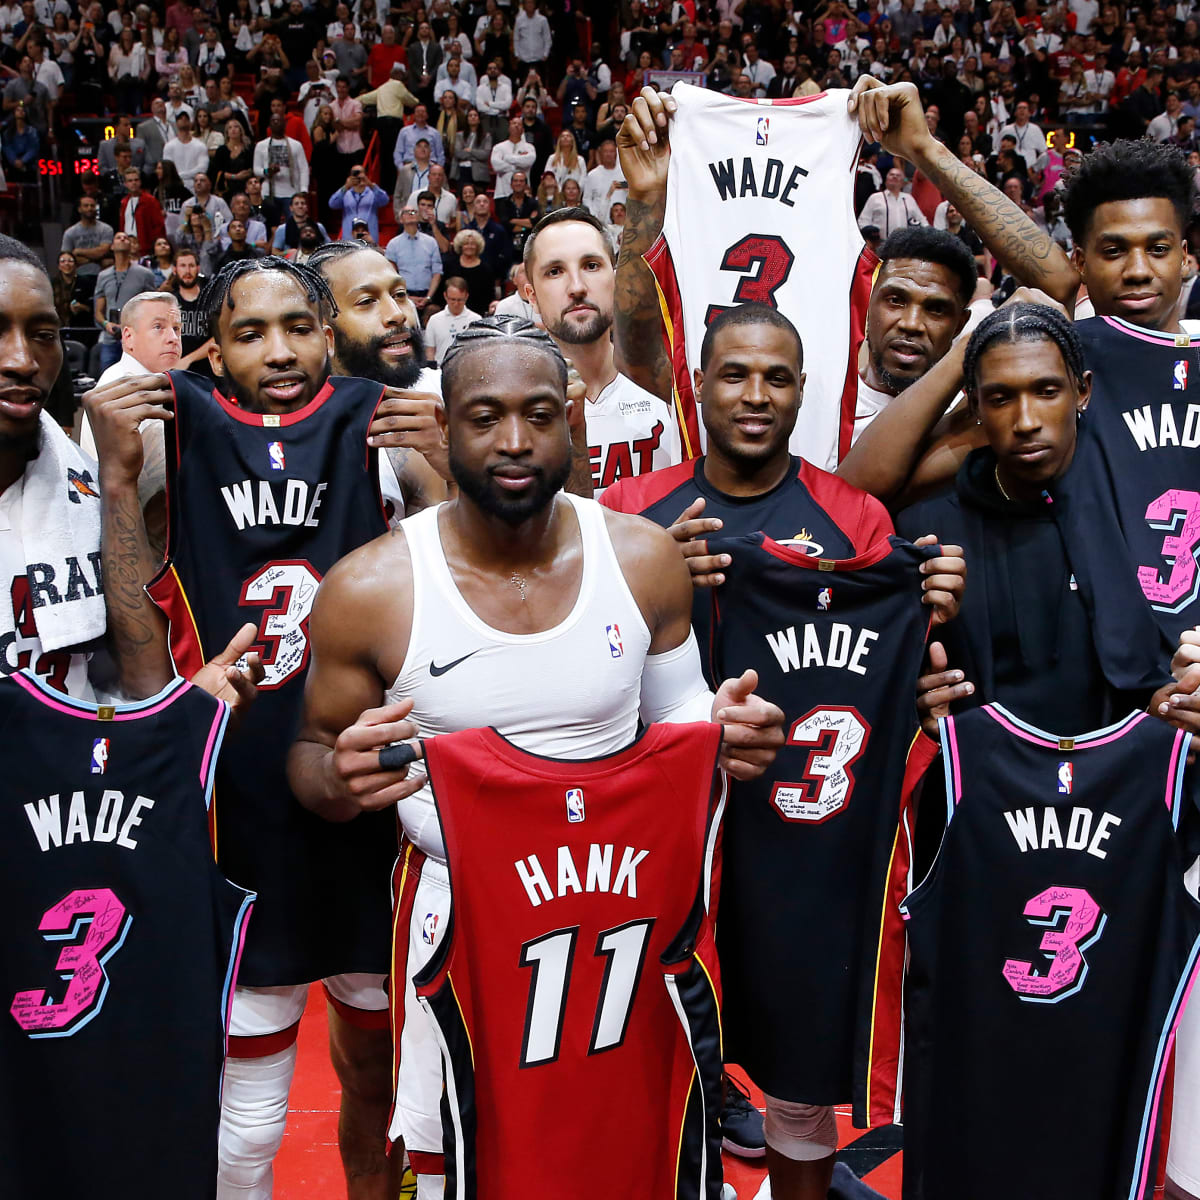 Dwyane Wade returns to Miami Heat after opting against retirement, NBA  News